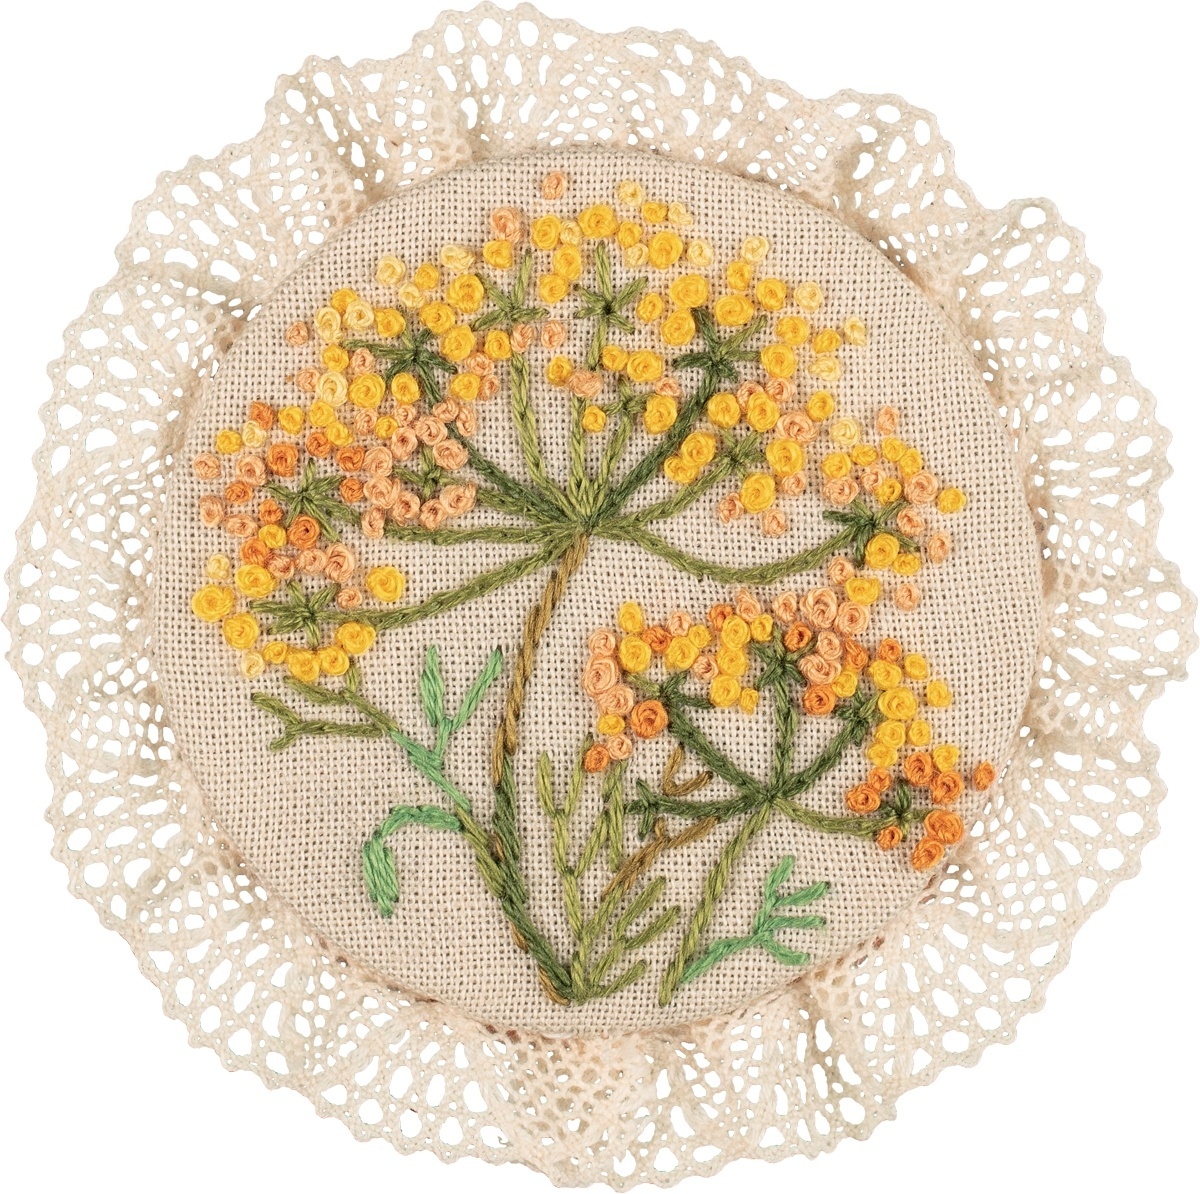 Vintage Brooches. Fennel and Lavender Embroidery Kit фото 6